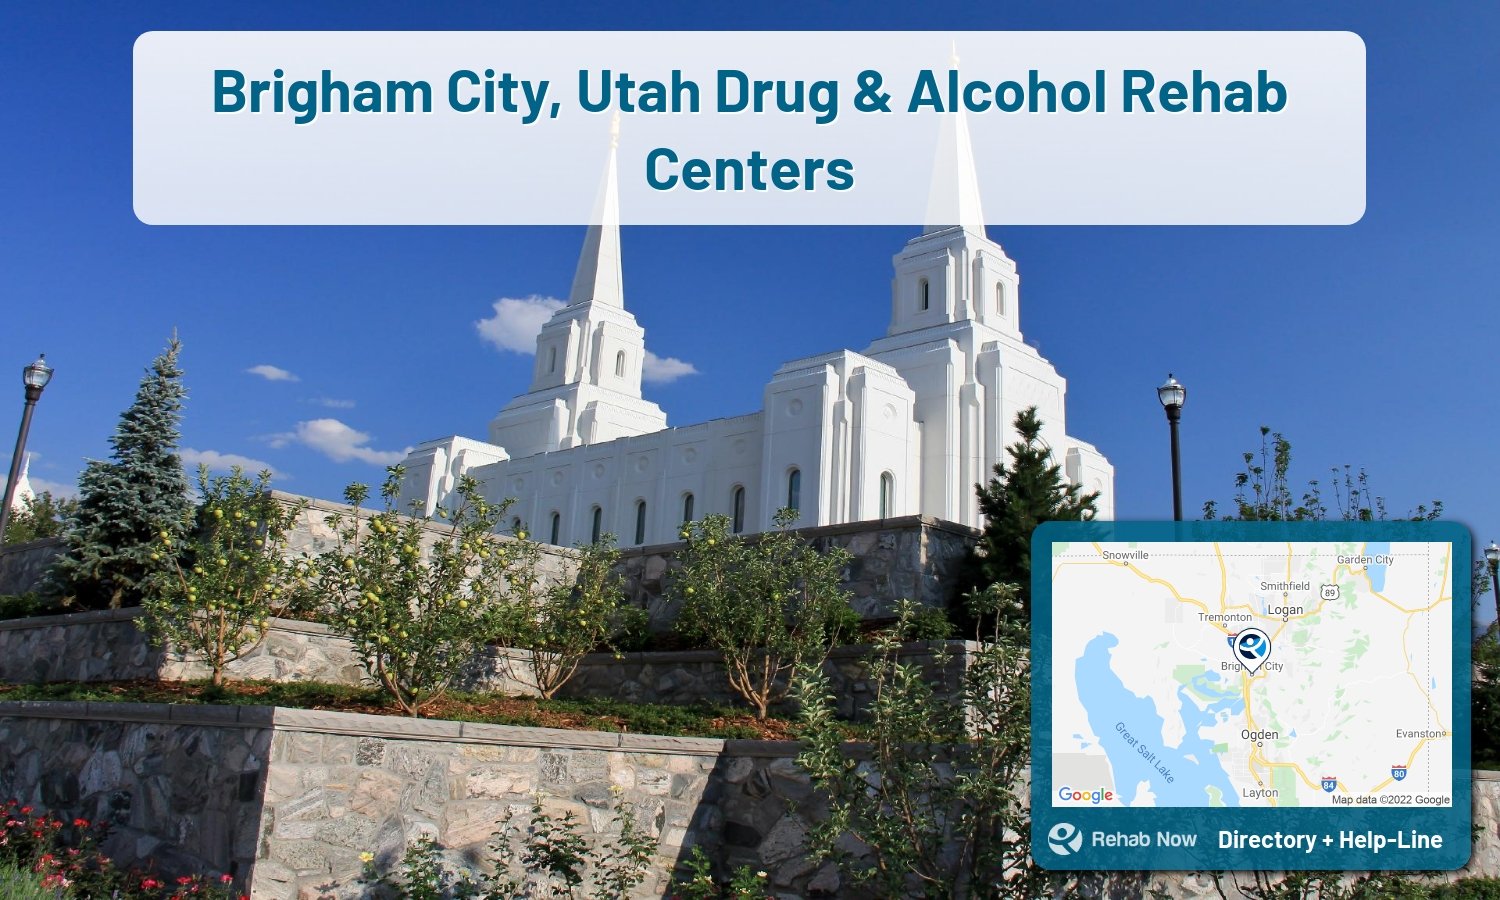 List of alcohol and drug treatment centers near you in Brigham City, Utah. Research certifications, programs, methods, pricing, and more.